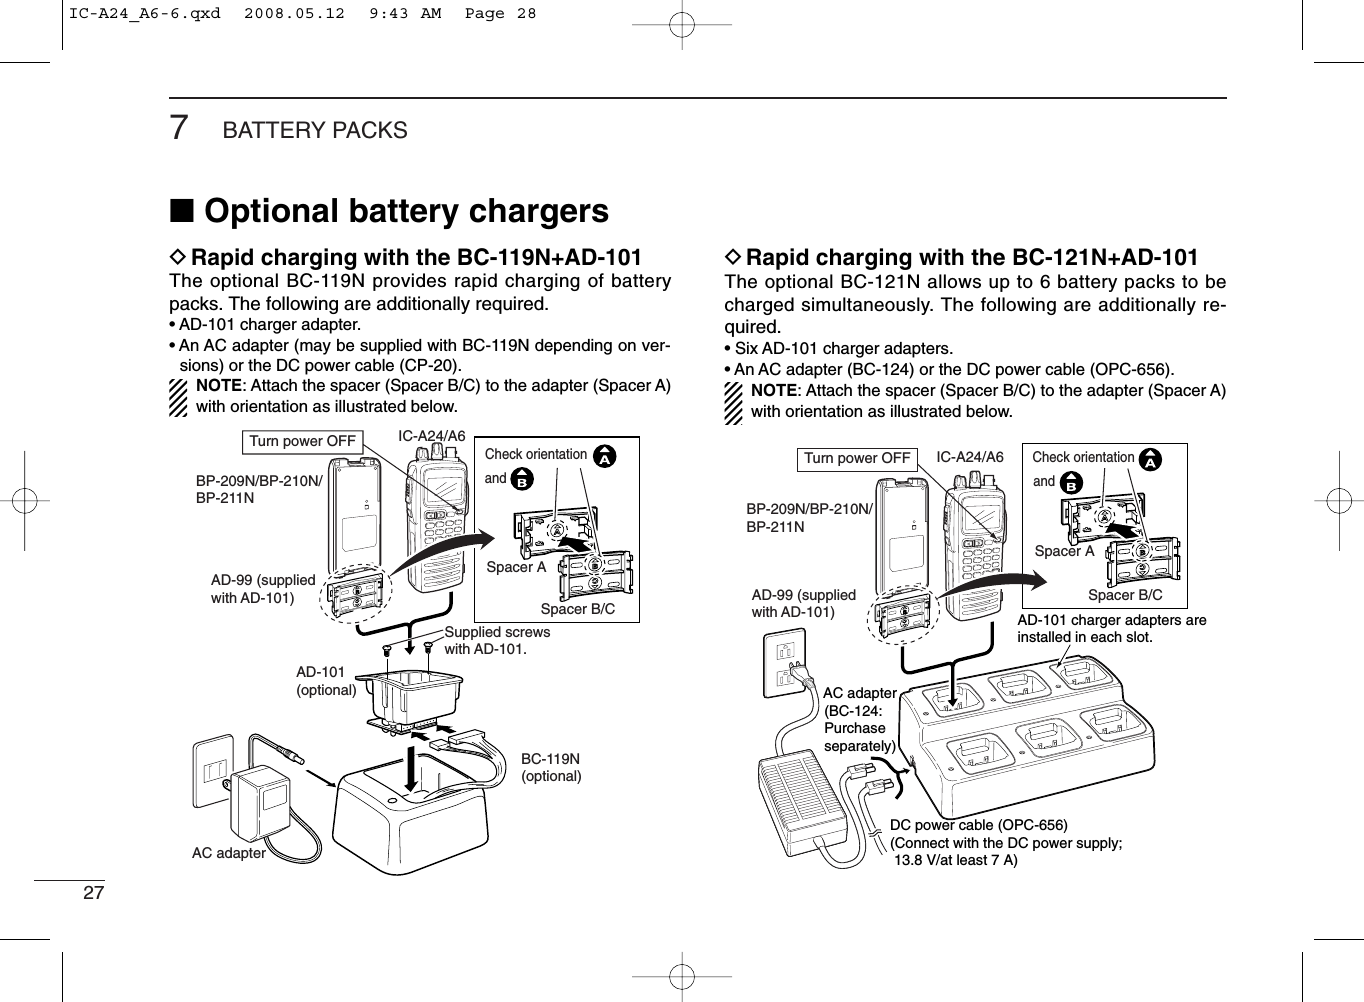 277BATTERY PACKS■Optional battery chargersDRapid charging with the BC-119N+AD-101The optional BC-119N provides rapid charging of batterypacks. The following are additionally required.• AD-101 charger adapter.• An AC adapter (may be supplied with BC-119N depending on ver-sions) or the DC power cable (CP-20).NOTE: Attach the spacer (Spacer B/C) to the adapter (Spacer A)with orientation as illustrated below.DRapid charging with the BC-121N+AD-101The optional BC-121N allows up to 6 battery packs to becharged simultaneously. The following are additionally re-quired.• Six AD-101 charger adapters.• An AC adapter (BC-124) or the DC power cable (OPC-656).NOTE: Attach the spacer (Spacer B/C) to the adapter (Spacer A)with orientation as illustrated below.AD-99 (suppliedwith AD-101)AD-101(optional)AC adapterSupplied screwswith AD-101.BC-119N(optional)IC-A24/A6BP-209N/BP-210N/BP-211NTurn power OFFSpacer ASpacer B/CCheck orientationandIC-A24/A6BP-209N/BP-210N/BP-211N AC adapter (BC-124: Purchase separately)AD-101 charger adapters are installed in each slot.DC power cable (OPC-656)(Connect with the DC power supply;  13.8 V/at least 7 A)Turn power OFFAD-99 (supplied with AD-101)Spacer ASpacer B/CCheck orientationandIC-A24_A6-6.qxd  2008.05.12  9:43 AM  Page 28